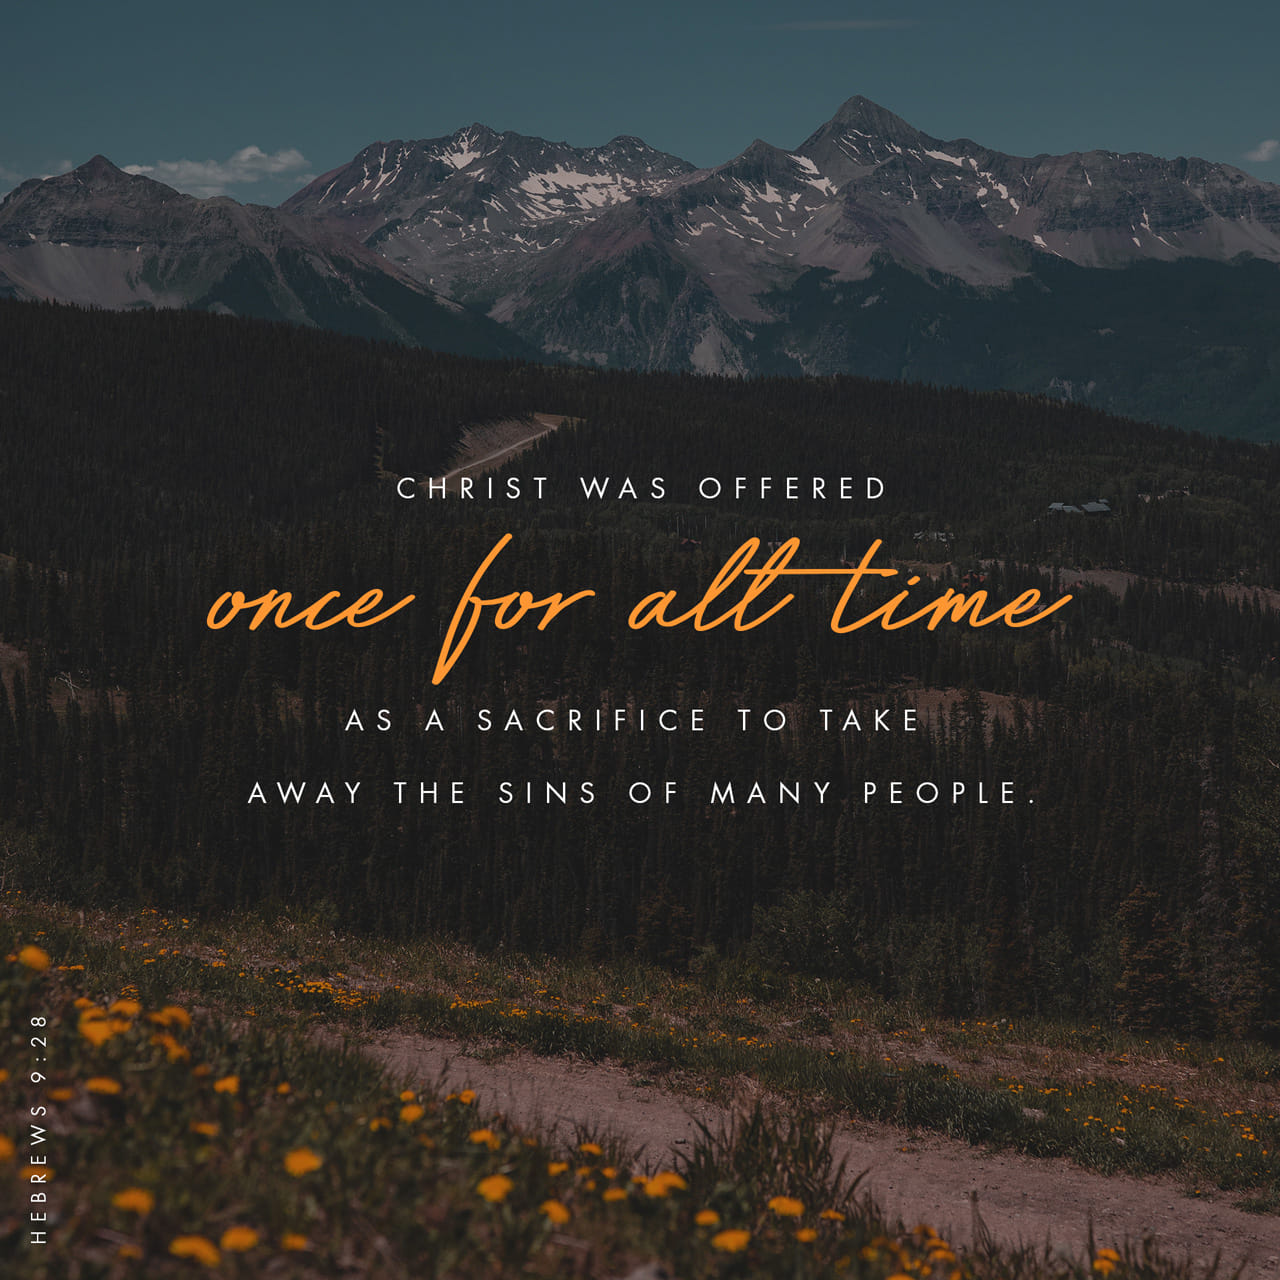 Hebrews 9:27-28 And as it is appointed unto men once to die, but after this the judgment: so Christ was once offered to bear the sins of many; and unto them that look for him shall he appear the second time without s | King James Version (KJV) | Download 